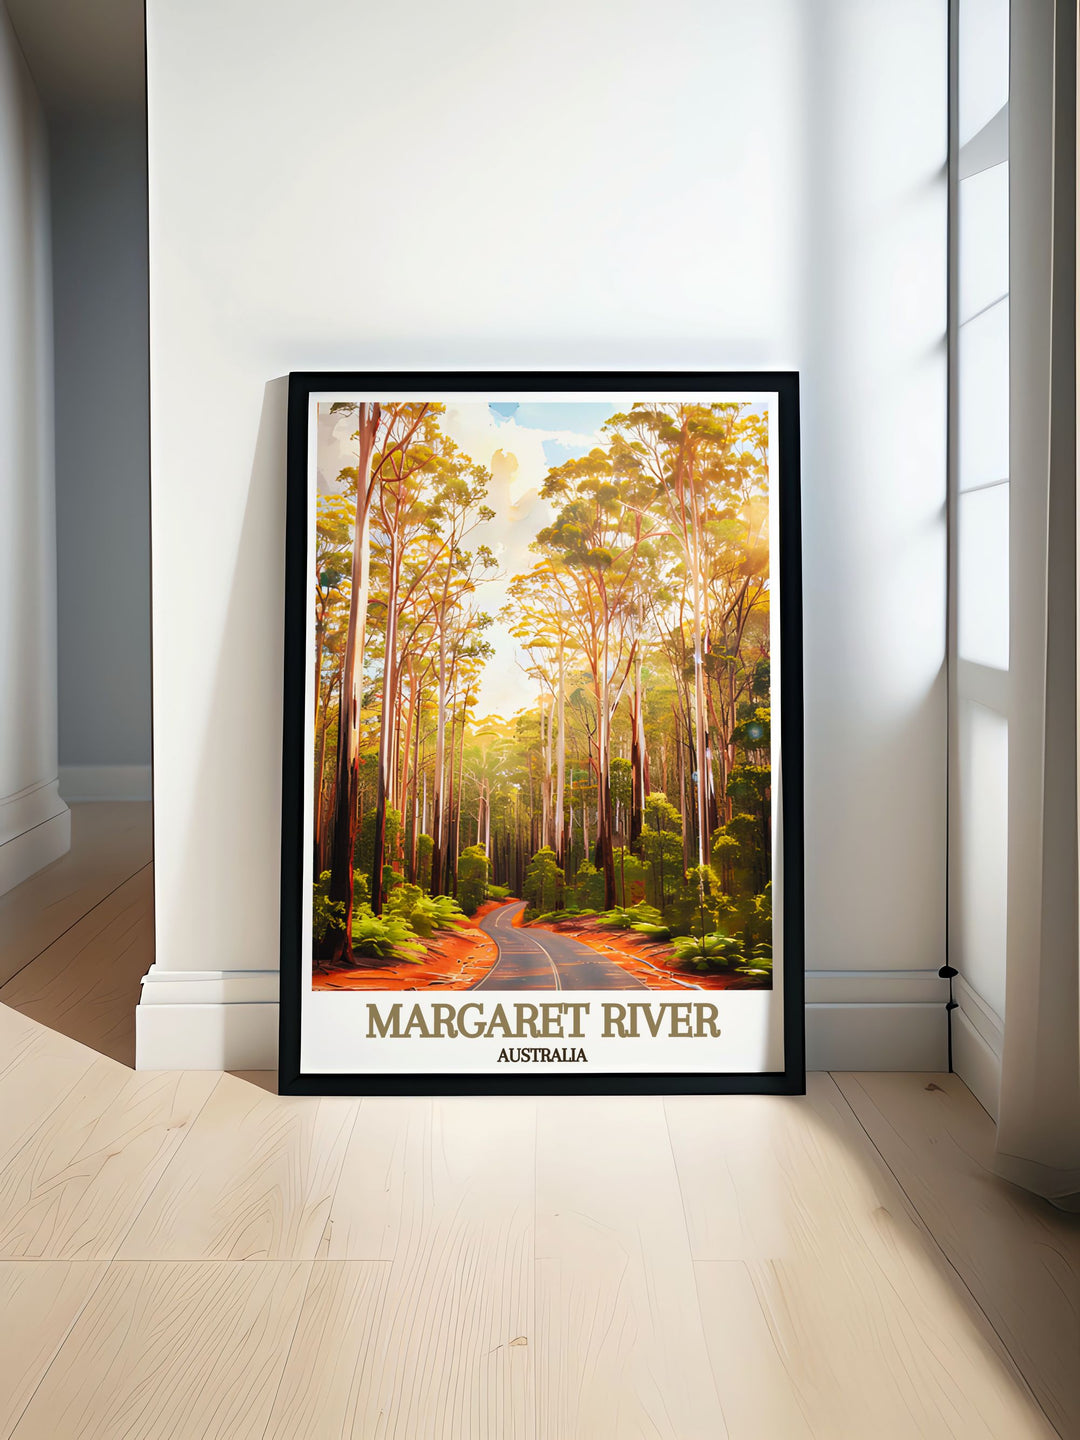 Discover the breathtaking views of Margaret River with our stunning Australia Wall Art featuring Boranup Karri Forest perfect for adding elegance to any room